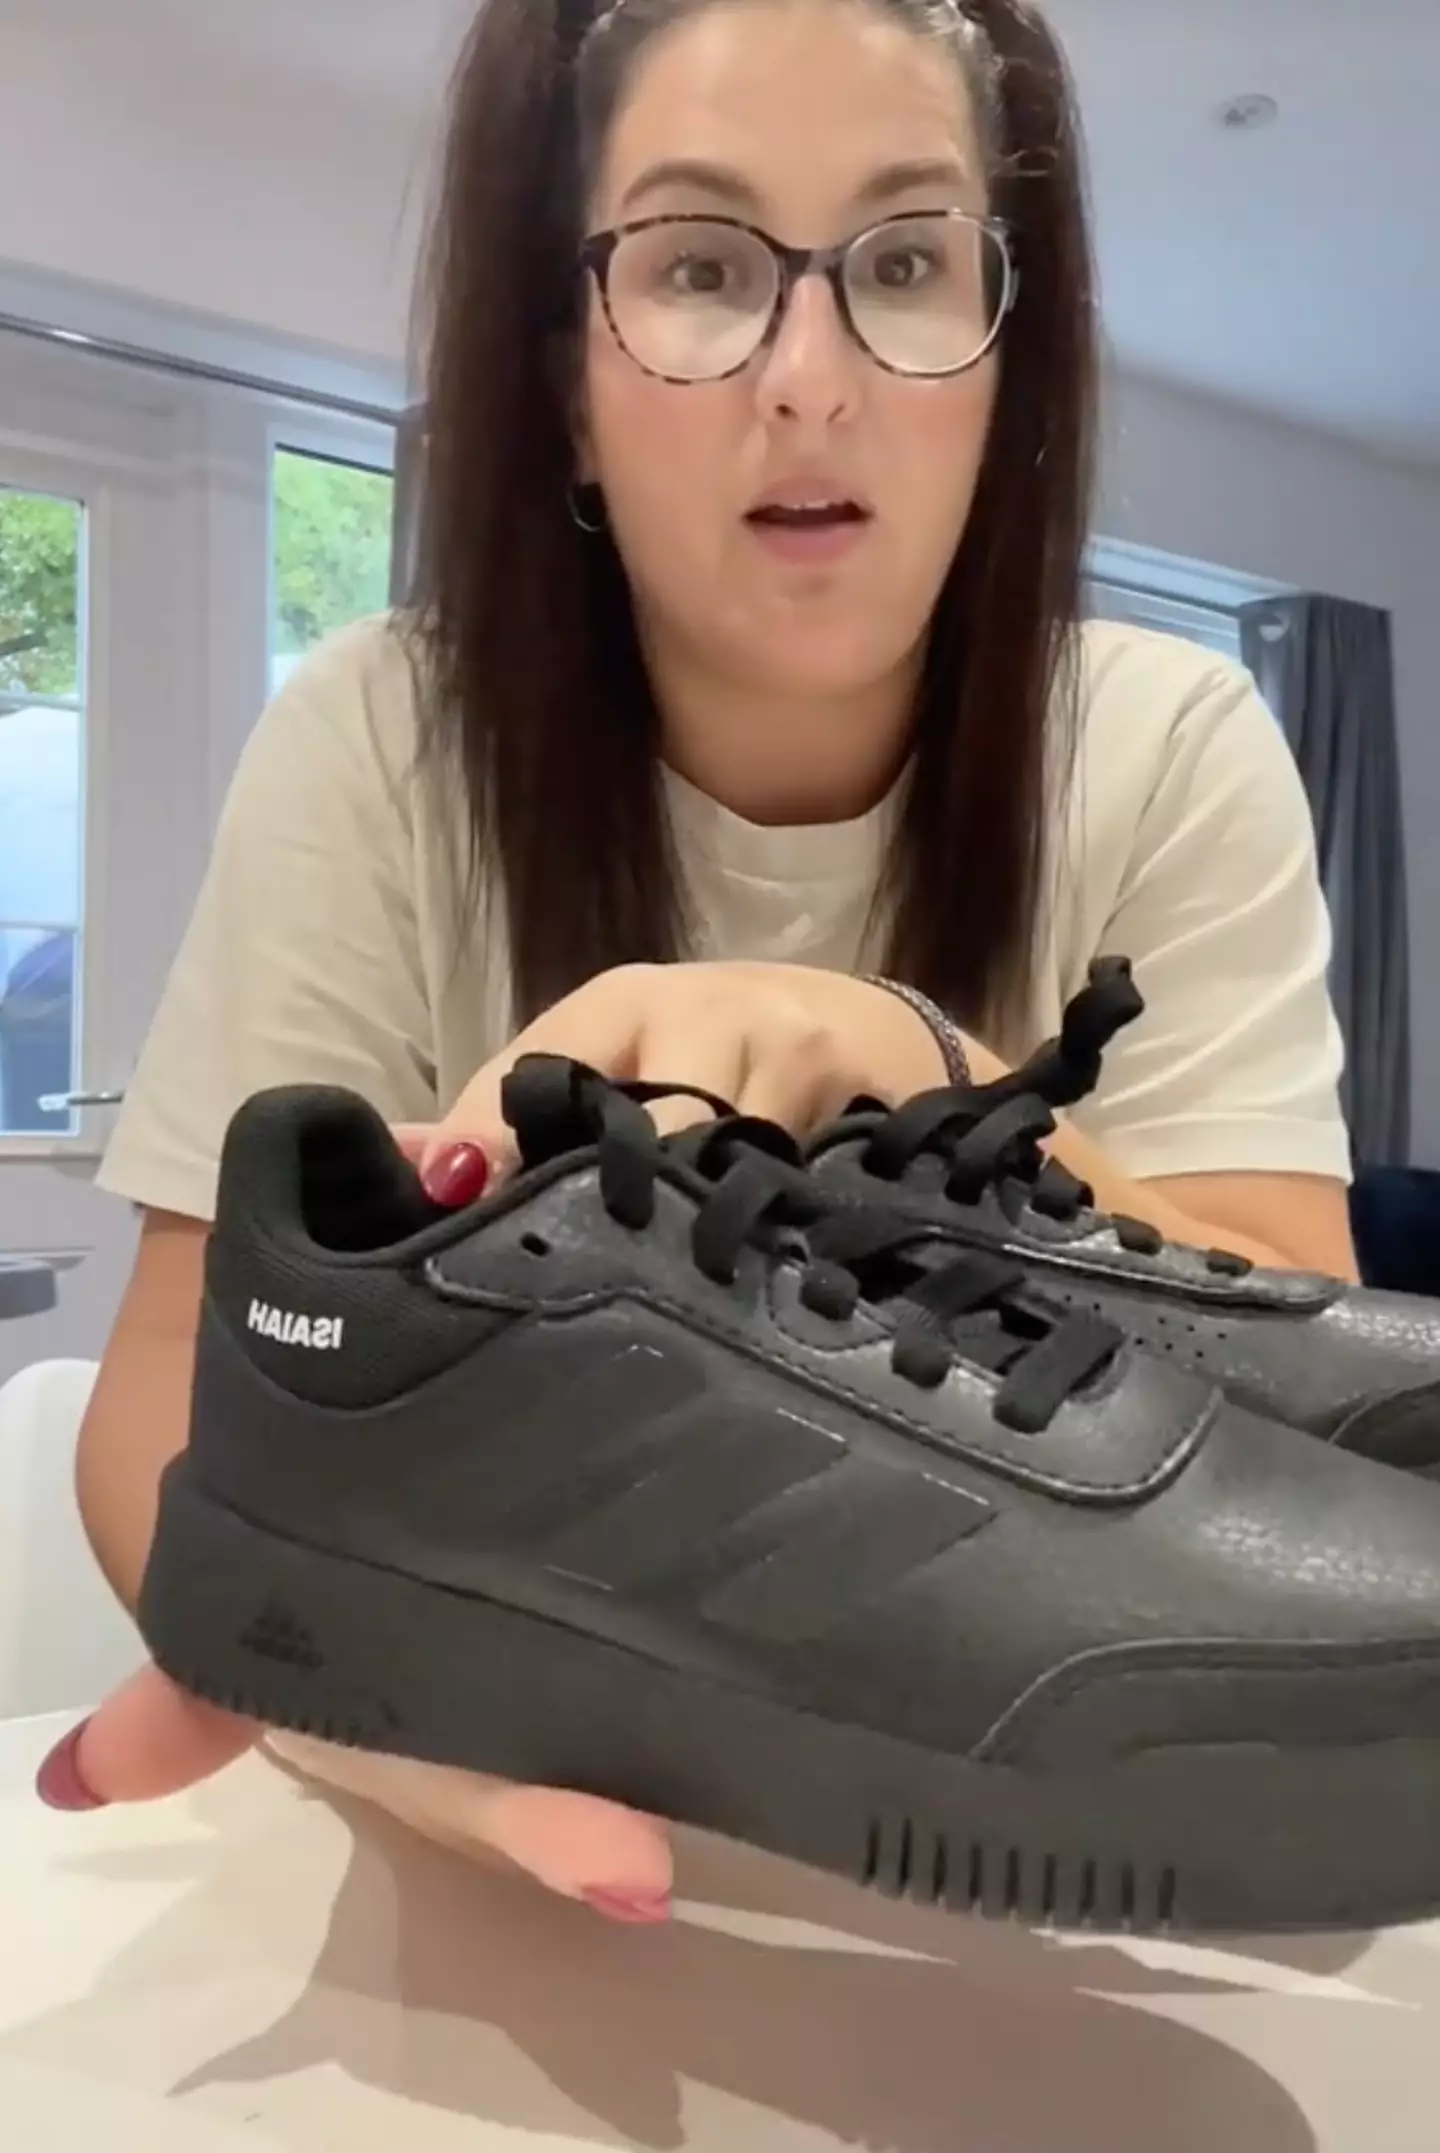 The mum hailed the Adidas shoes as 'game-changing'.